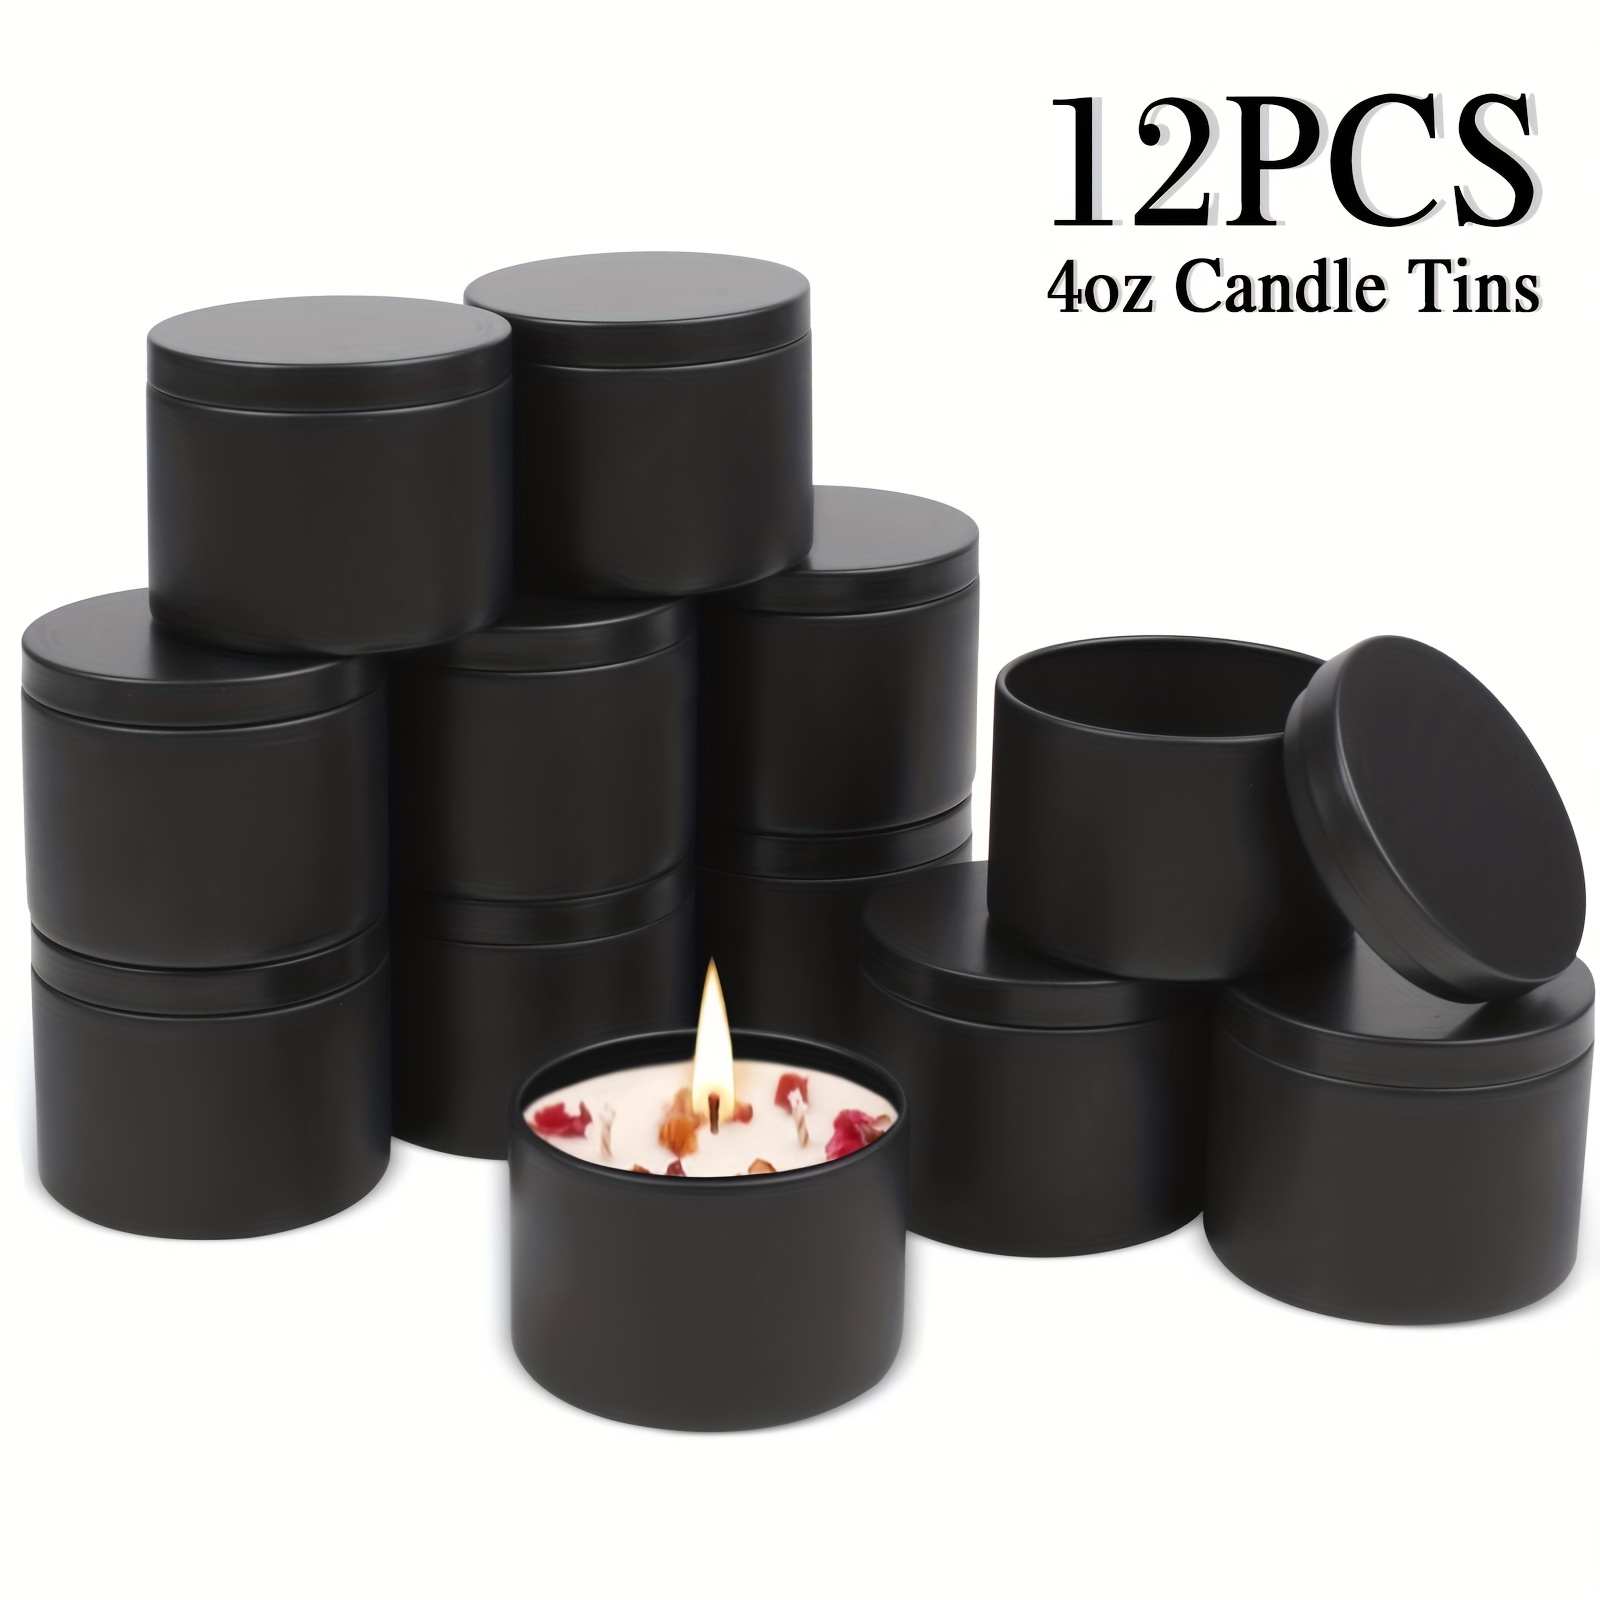 4oz Candle Tins With Lids,Black Candle Jars,,Candle Making Jars Dry Storage  Tins For Tea Candy Spice Gifts (Black), Cans4oz(12Pack, Black)